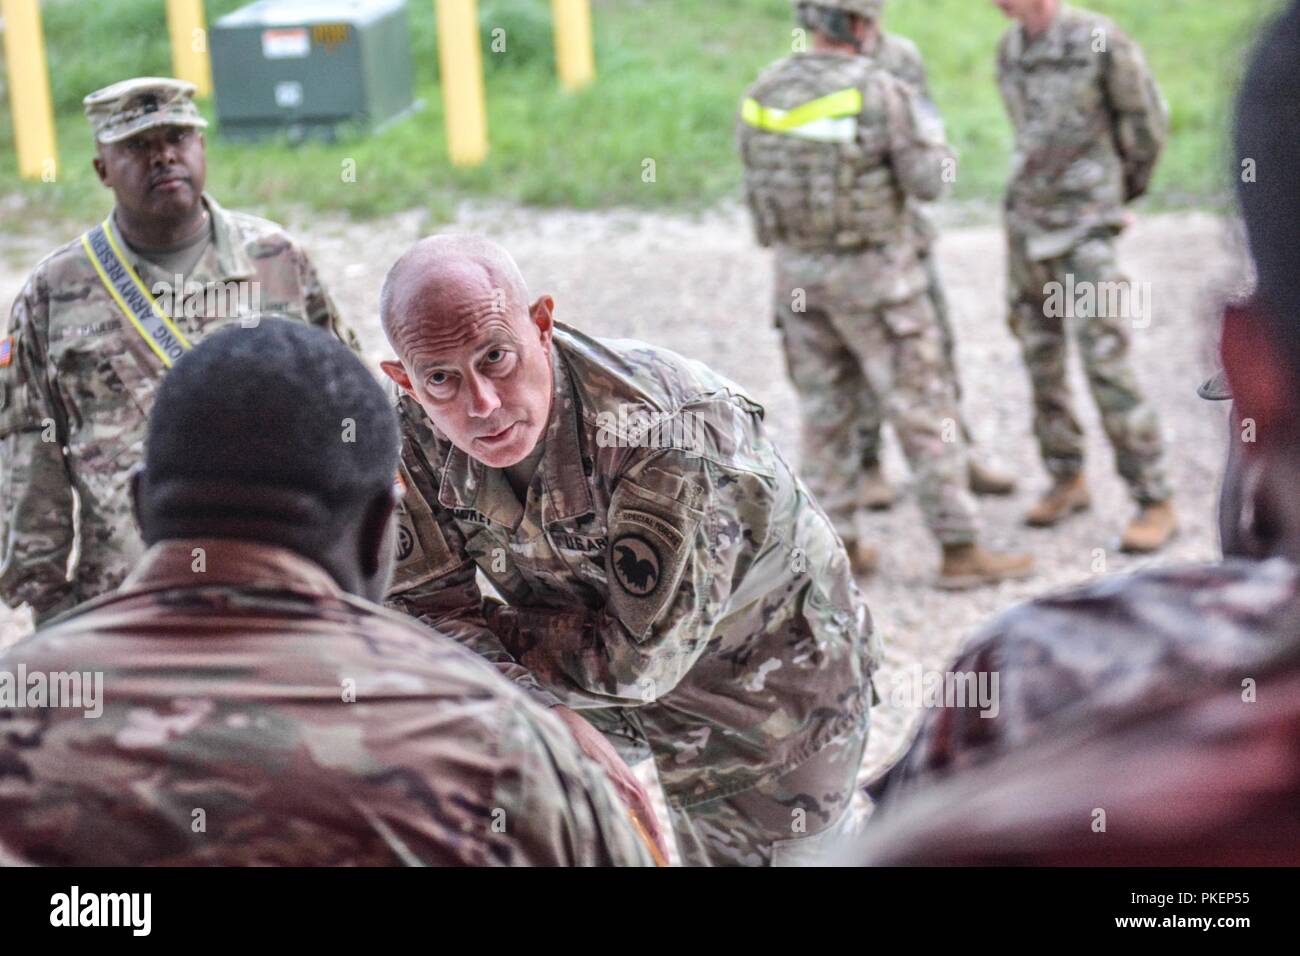 LTG Charles D. Luckey, Chief of Army Reserve and Commanding General, U.S. Army Reserve Command, speaks with Troop List Unit Soldiers during Task Force Ultimate, Operation Cold Steel II, hosted by U.S. Army Civil Affairs and Psychological Operations Command (Airborne), July 25, 2018 at Joint Base McGuire-Dix-Lakehurst, N.J. Operation Cold Steel is the U.S. Army Reserve's crew-served weapons qualification and validation exercise to ensure America's Army Reserve units and Soldiers are trained and ready to deploy on short notice as part of Ready Force X and bring combat-ready and lethal firepower  Stock Photo